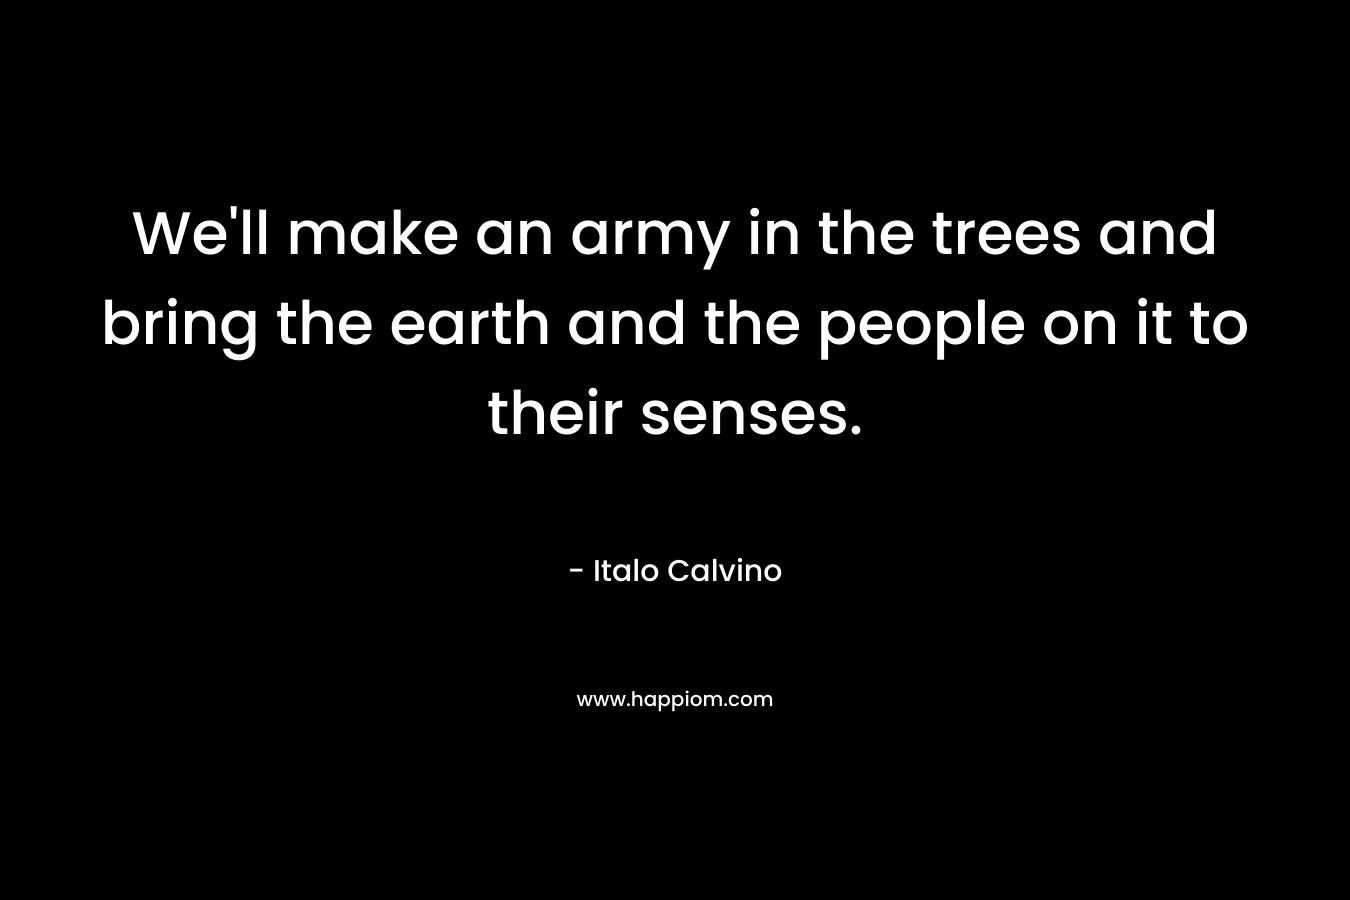 We'll make an army in the trees and bring the earth and the people on it to their senses.